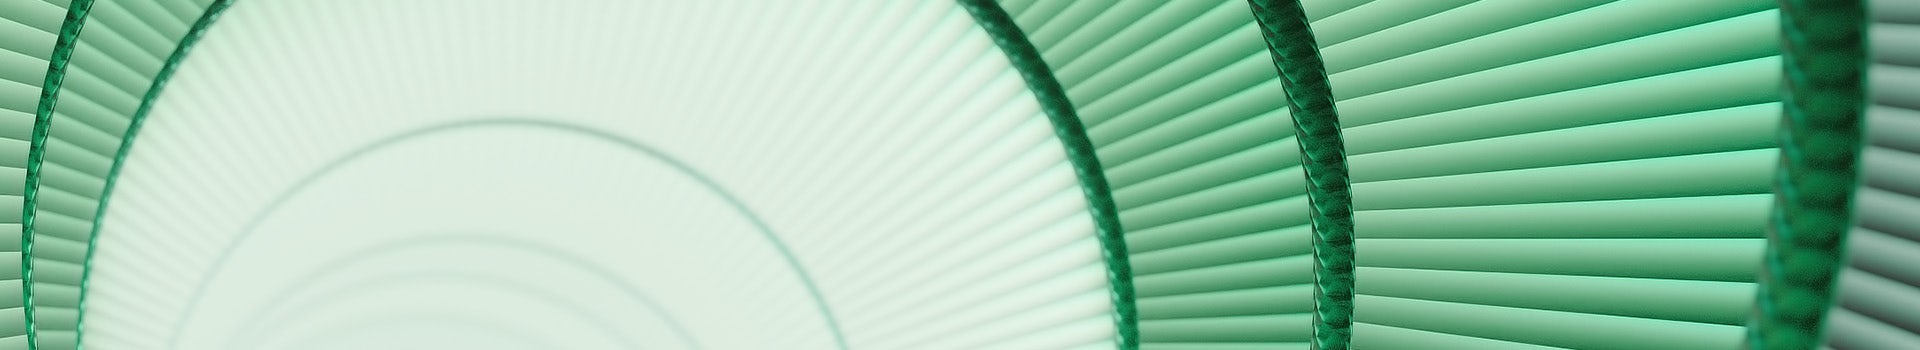 A green abstract background with a circular shape.